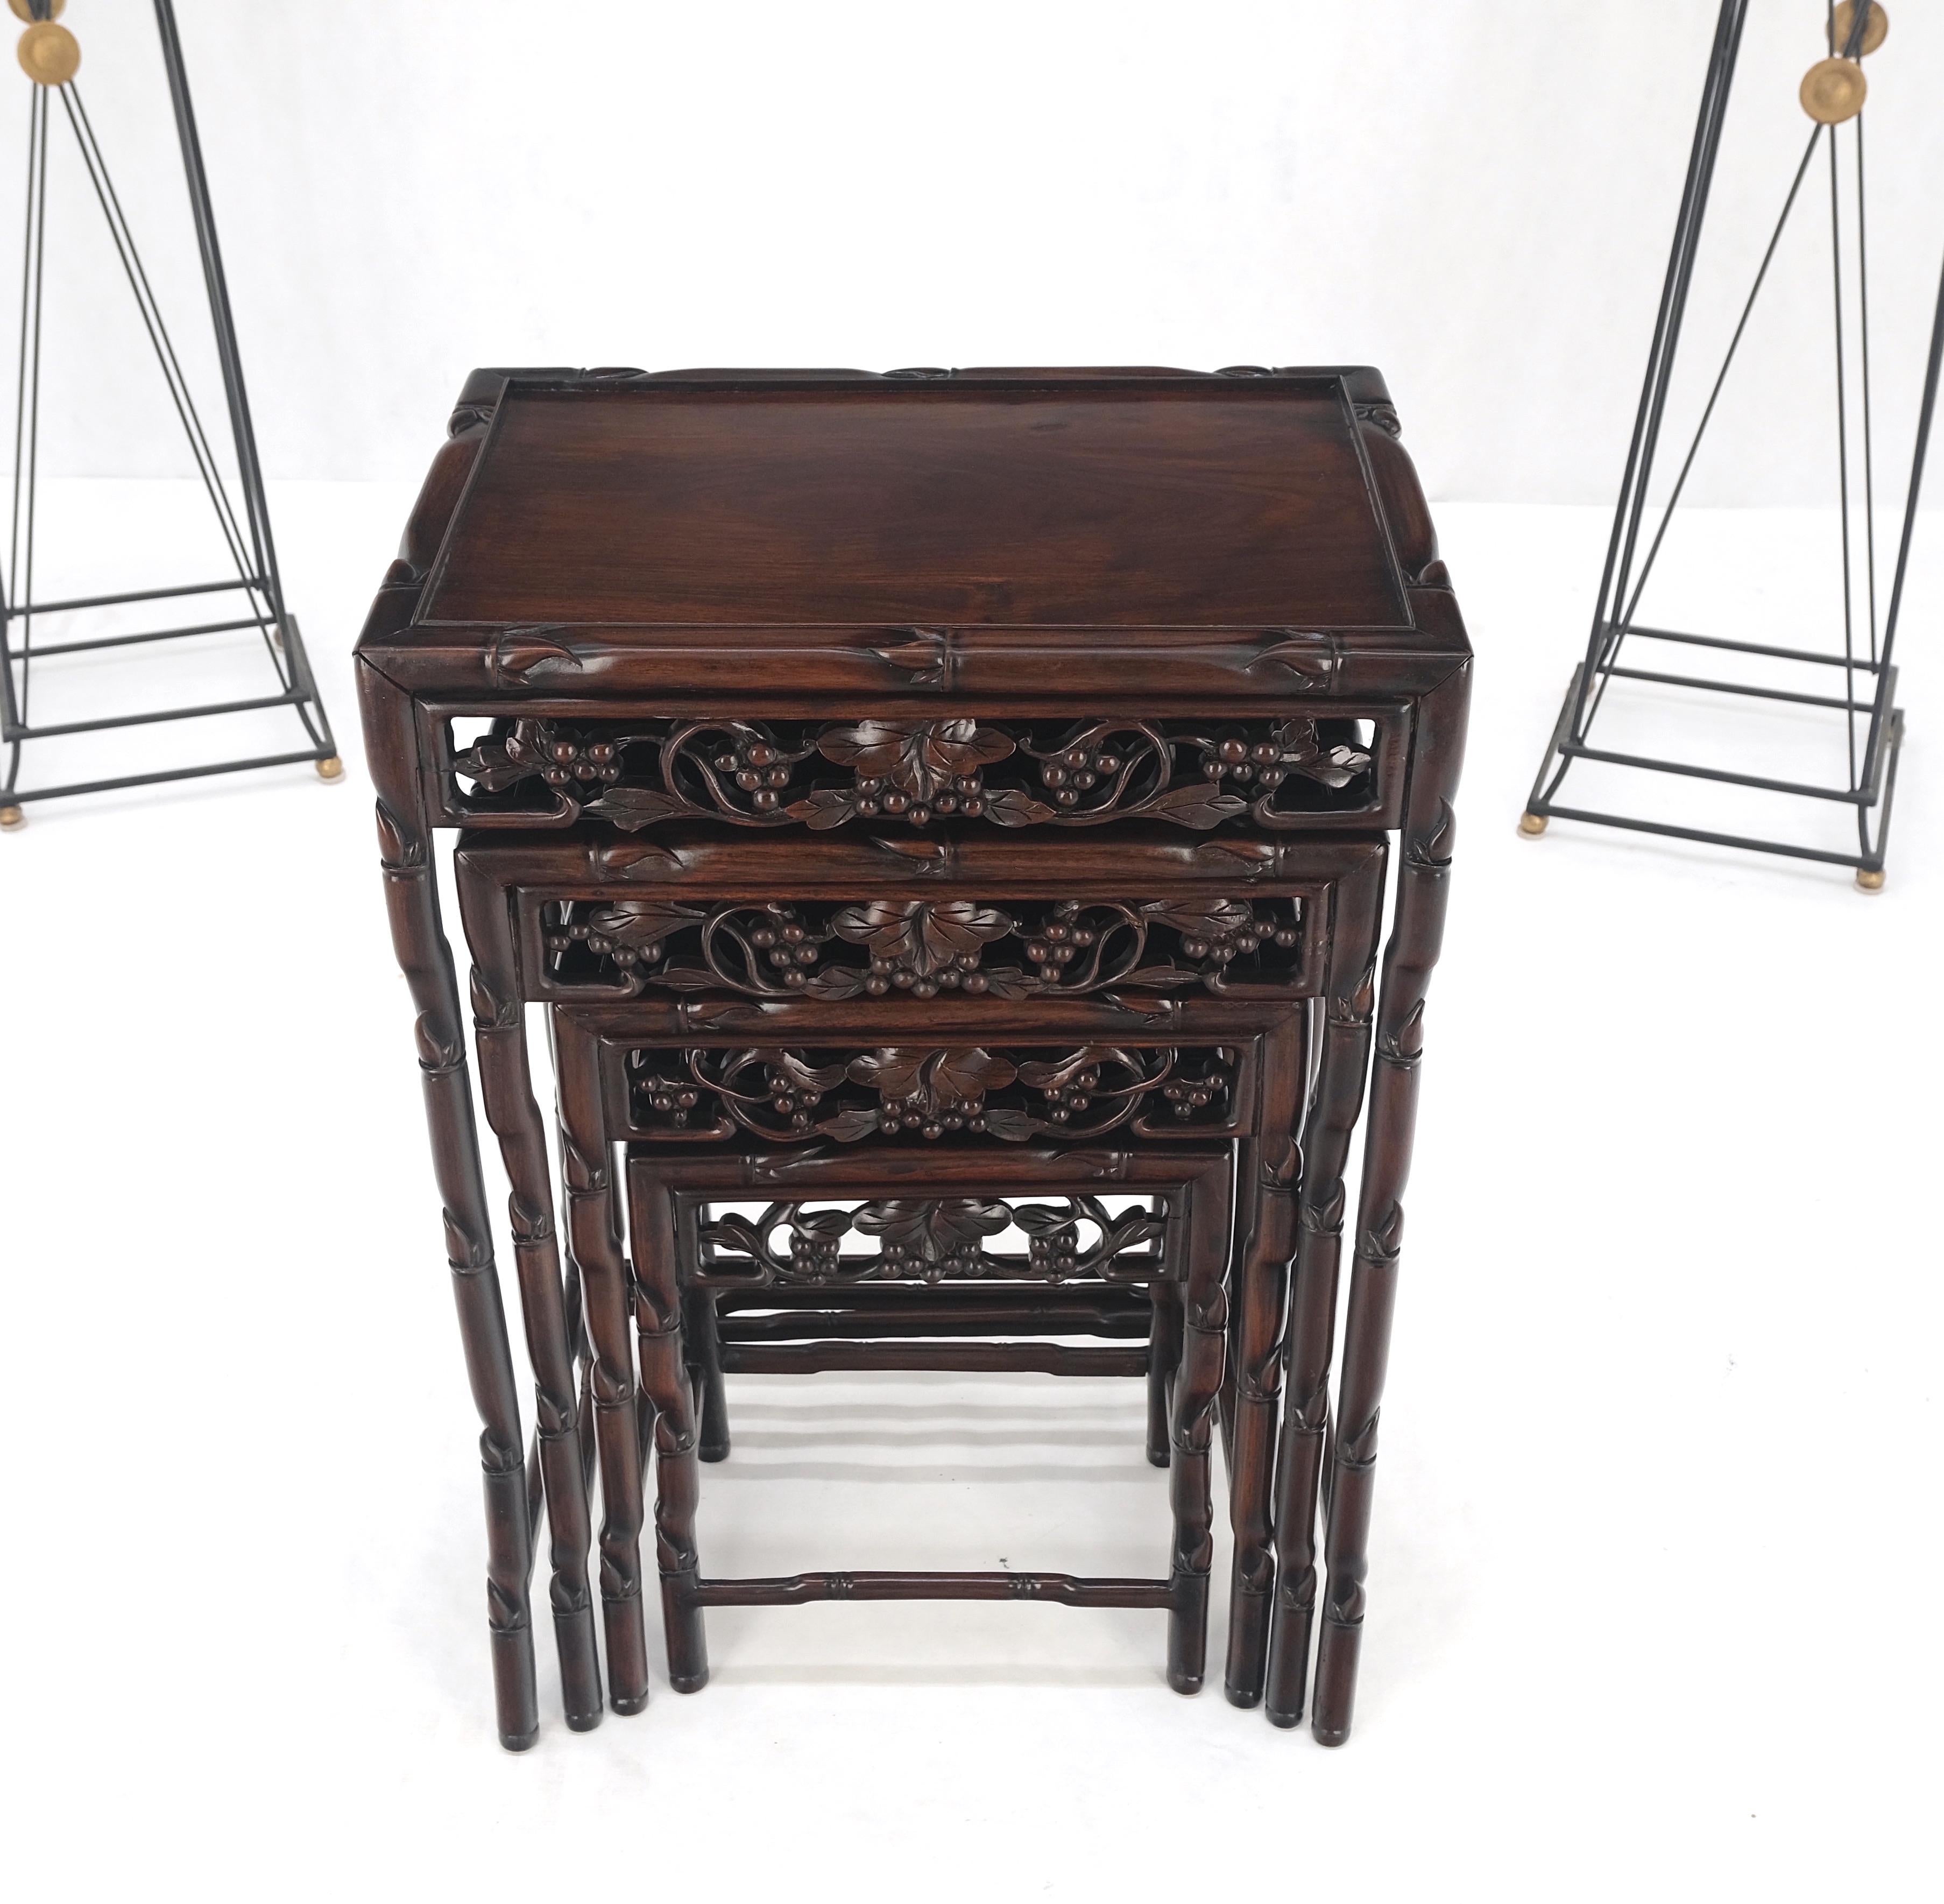 Phenomenal Set of 4 Nesting Stacking Carved Rosewood End Side Occasional Tables Set Mint!